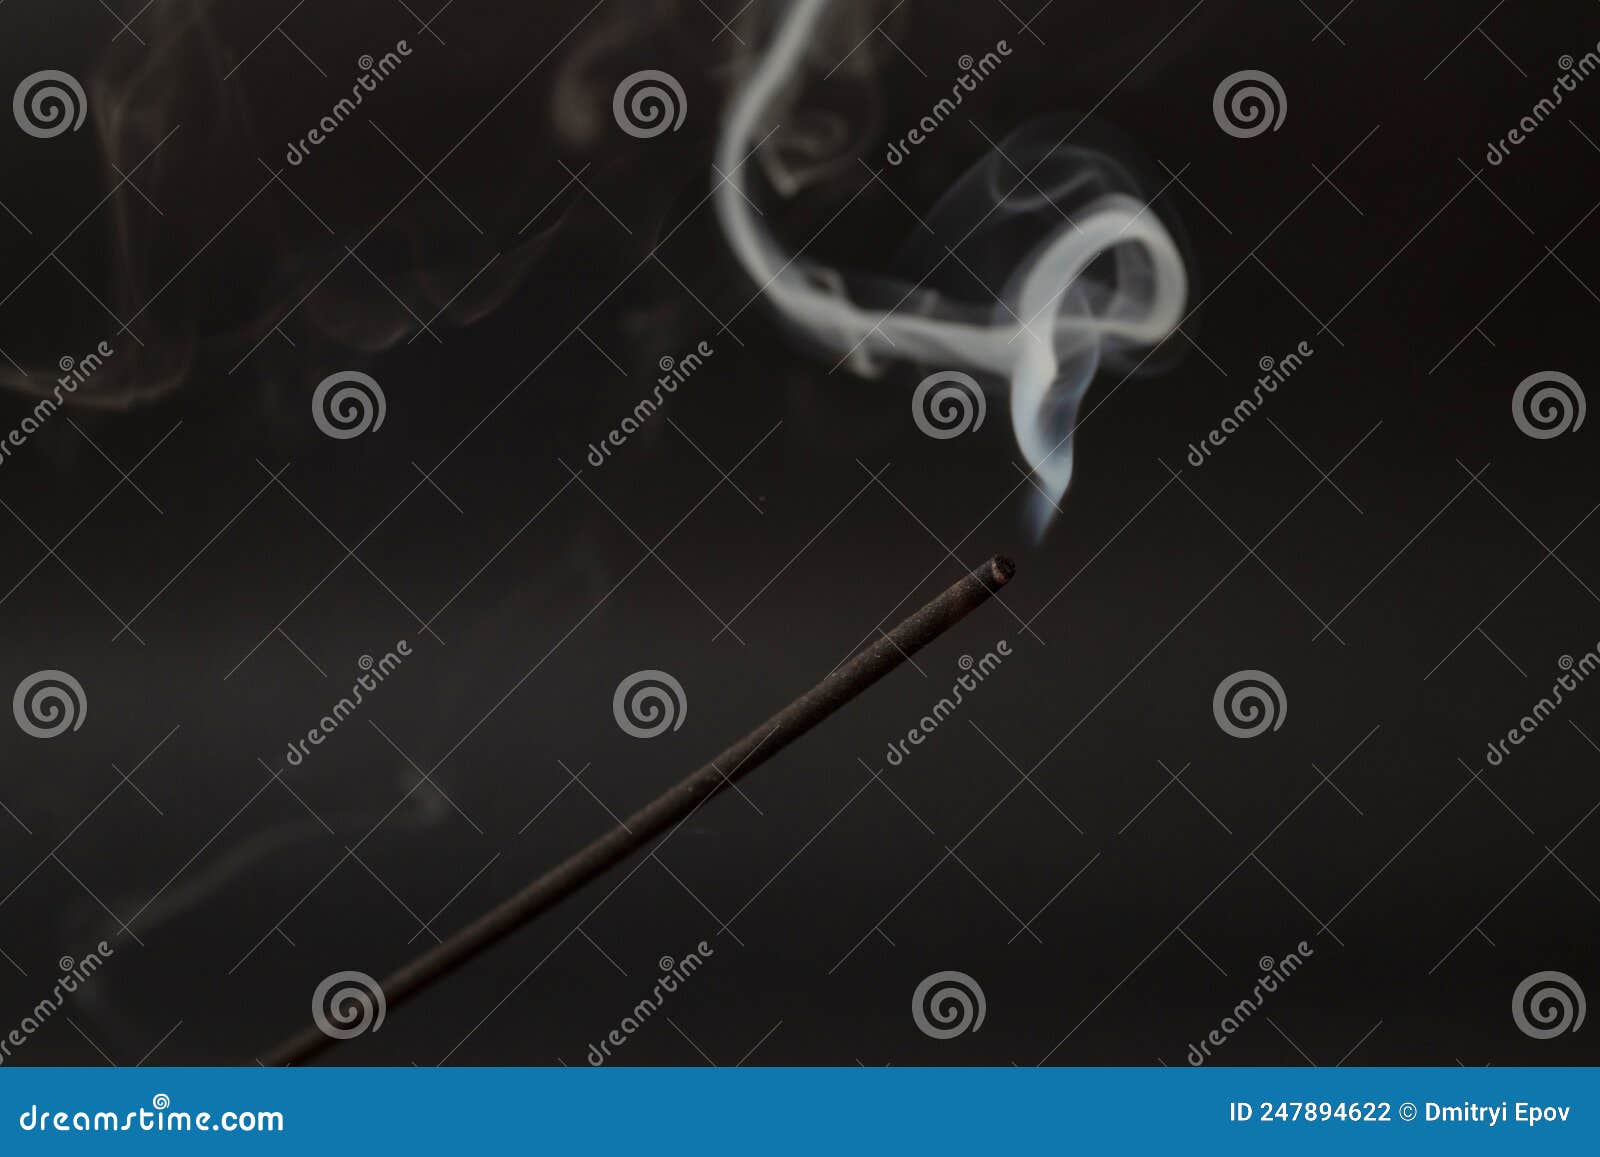 Incense Stick with Smoke on a Black Background Stock Photo - Image of ...